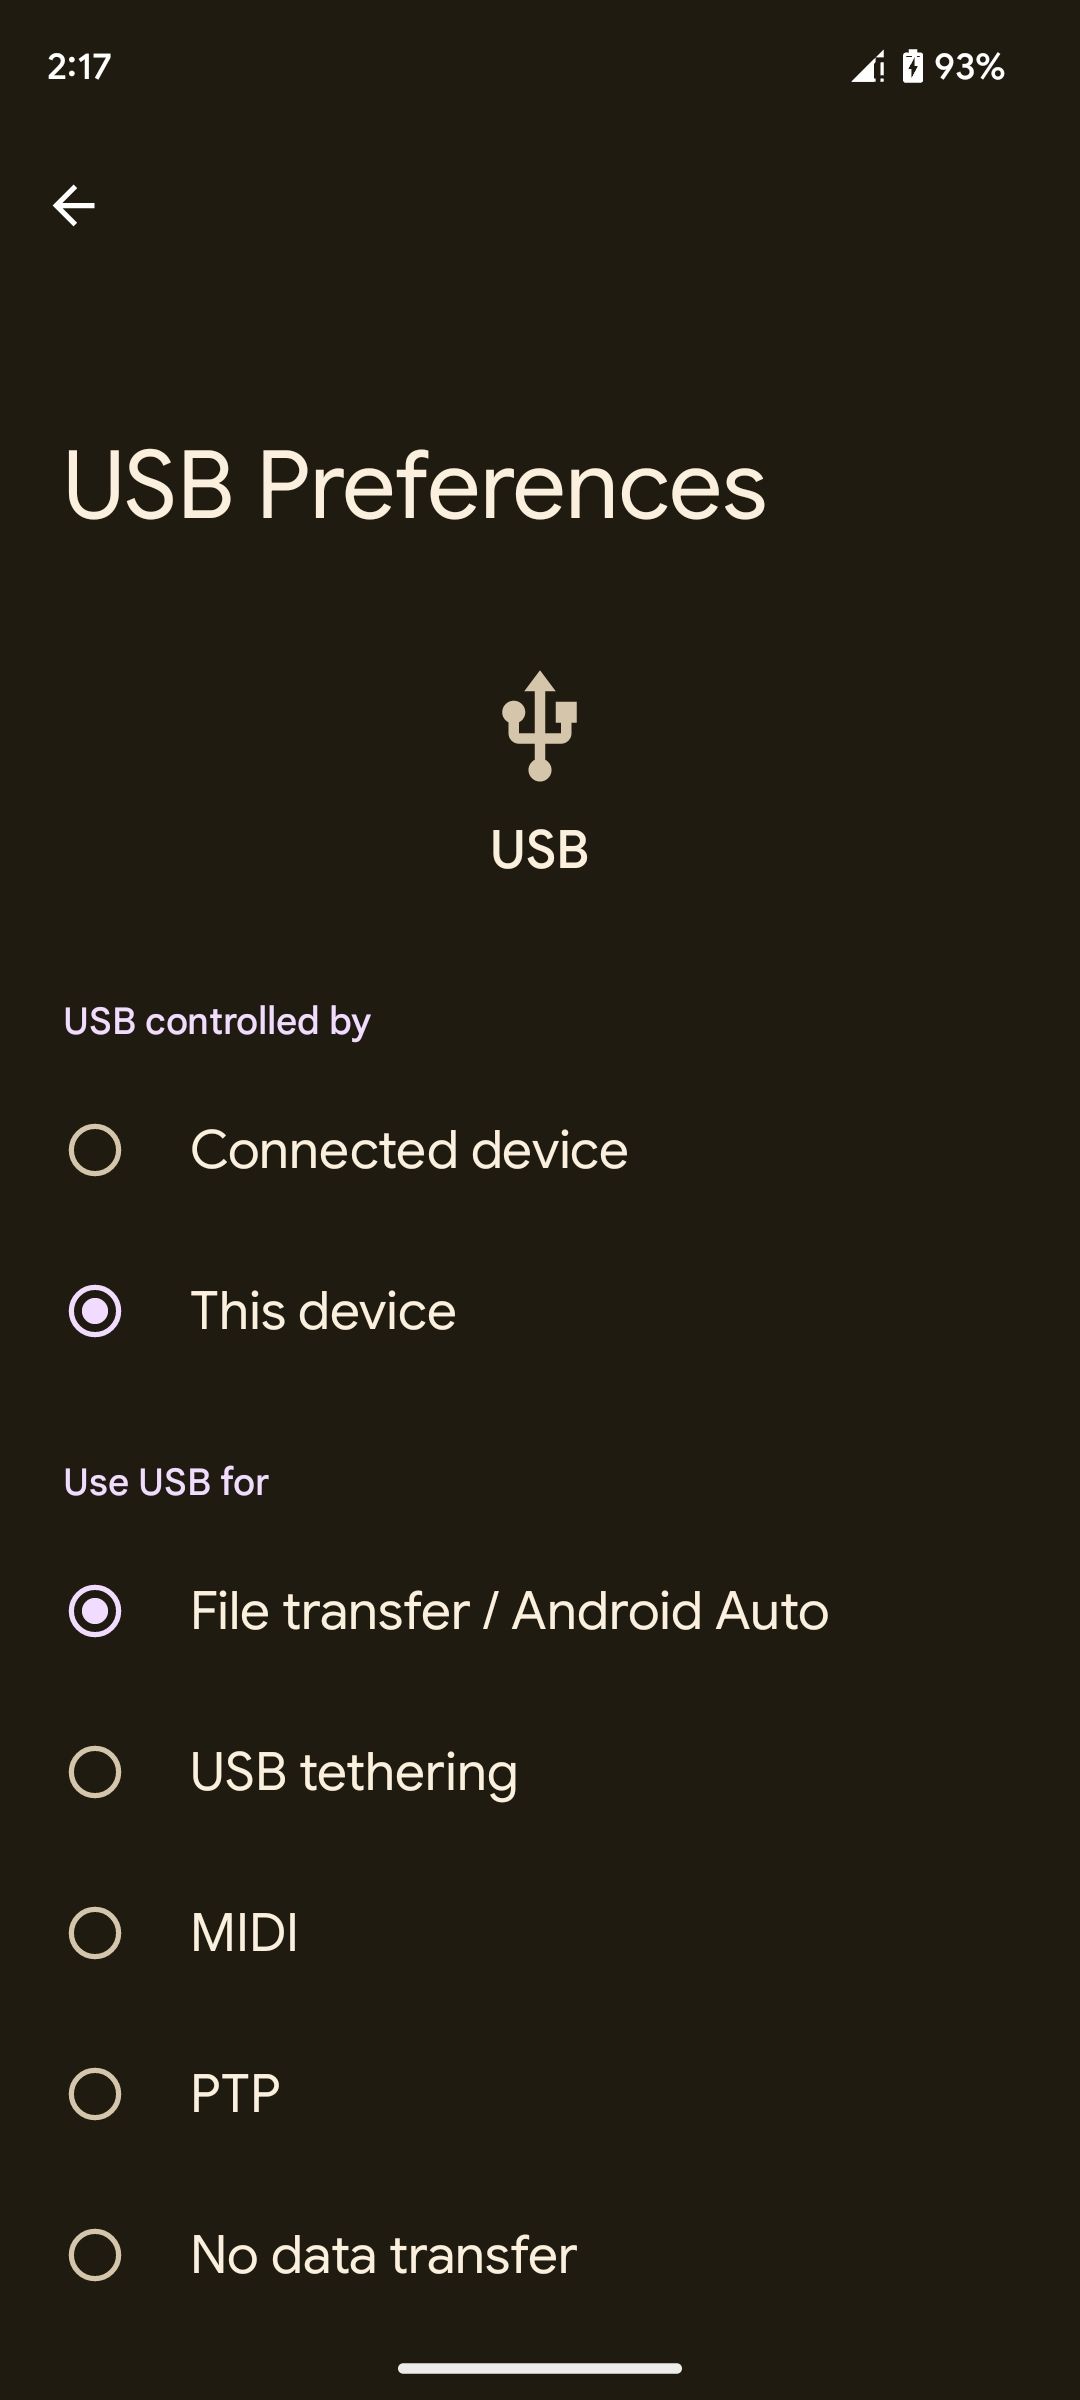 File transfer mode enabled in USB preferences settings